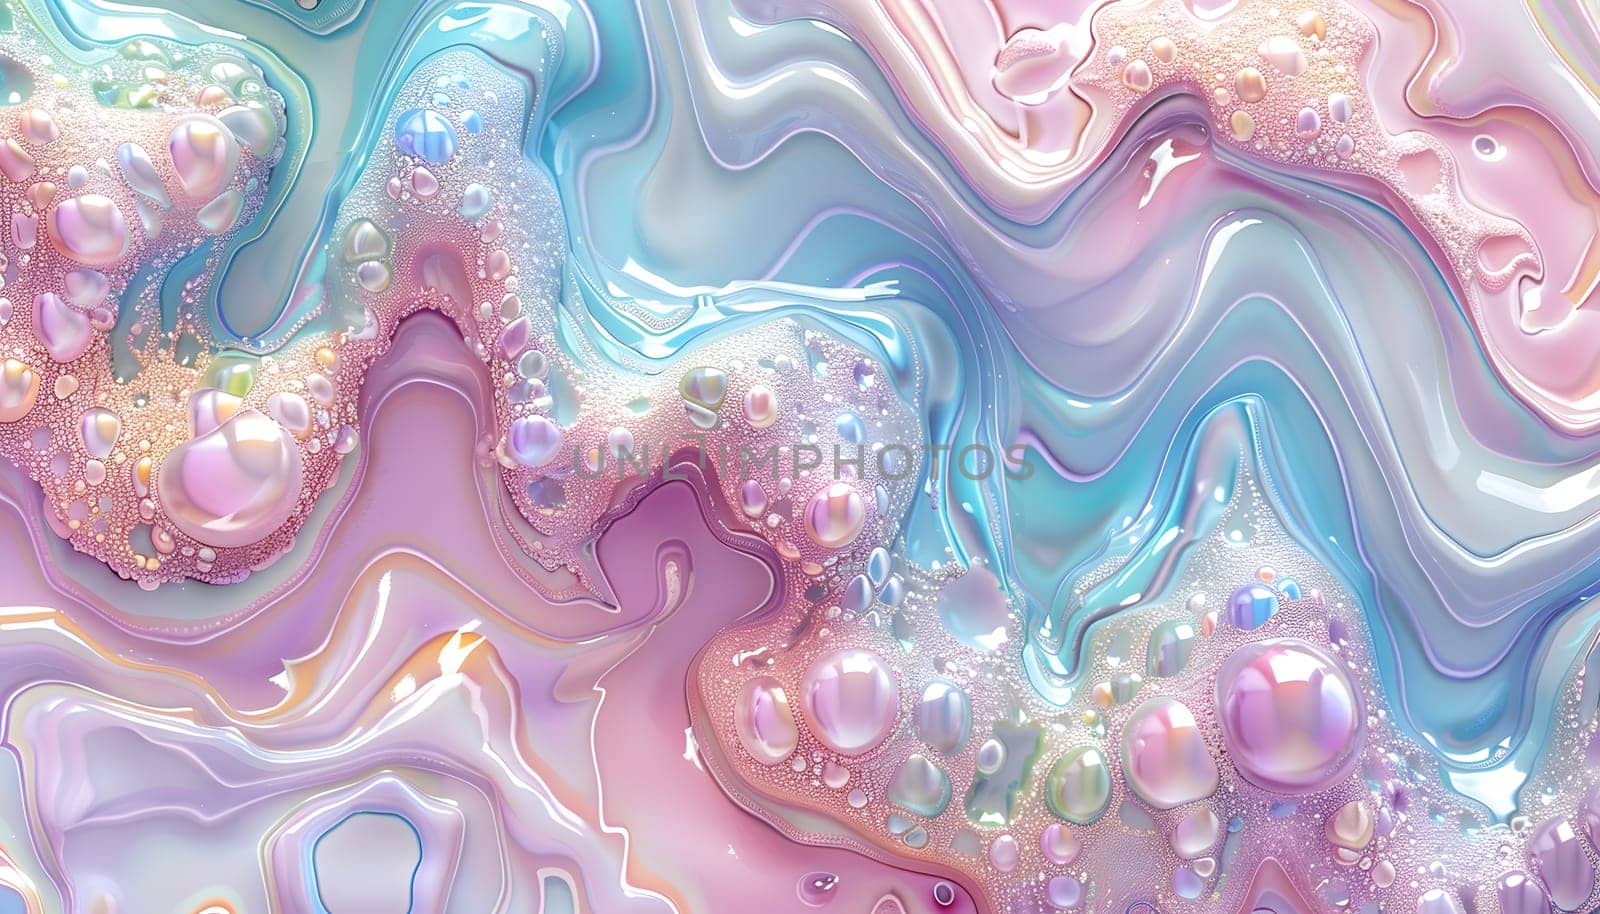 a close up of a colorful marble texture with bubbles and glitter by Nadtochiy